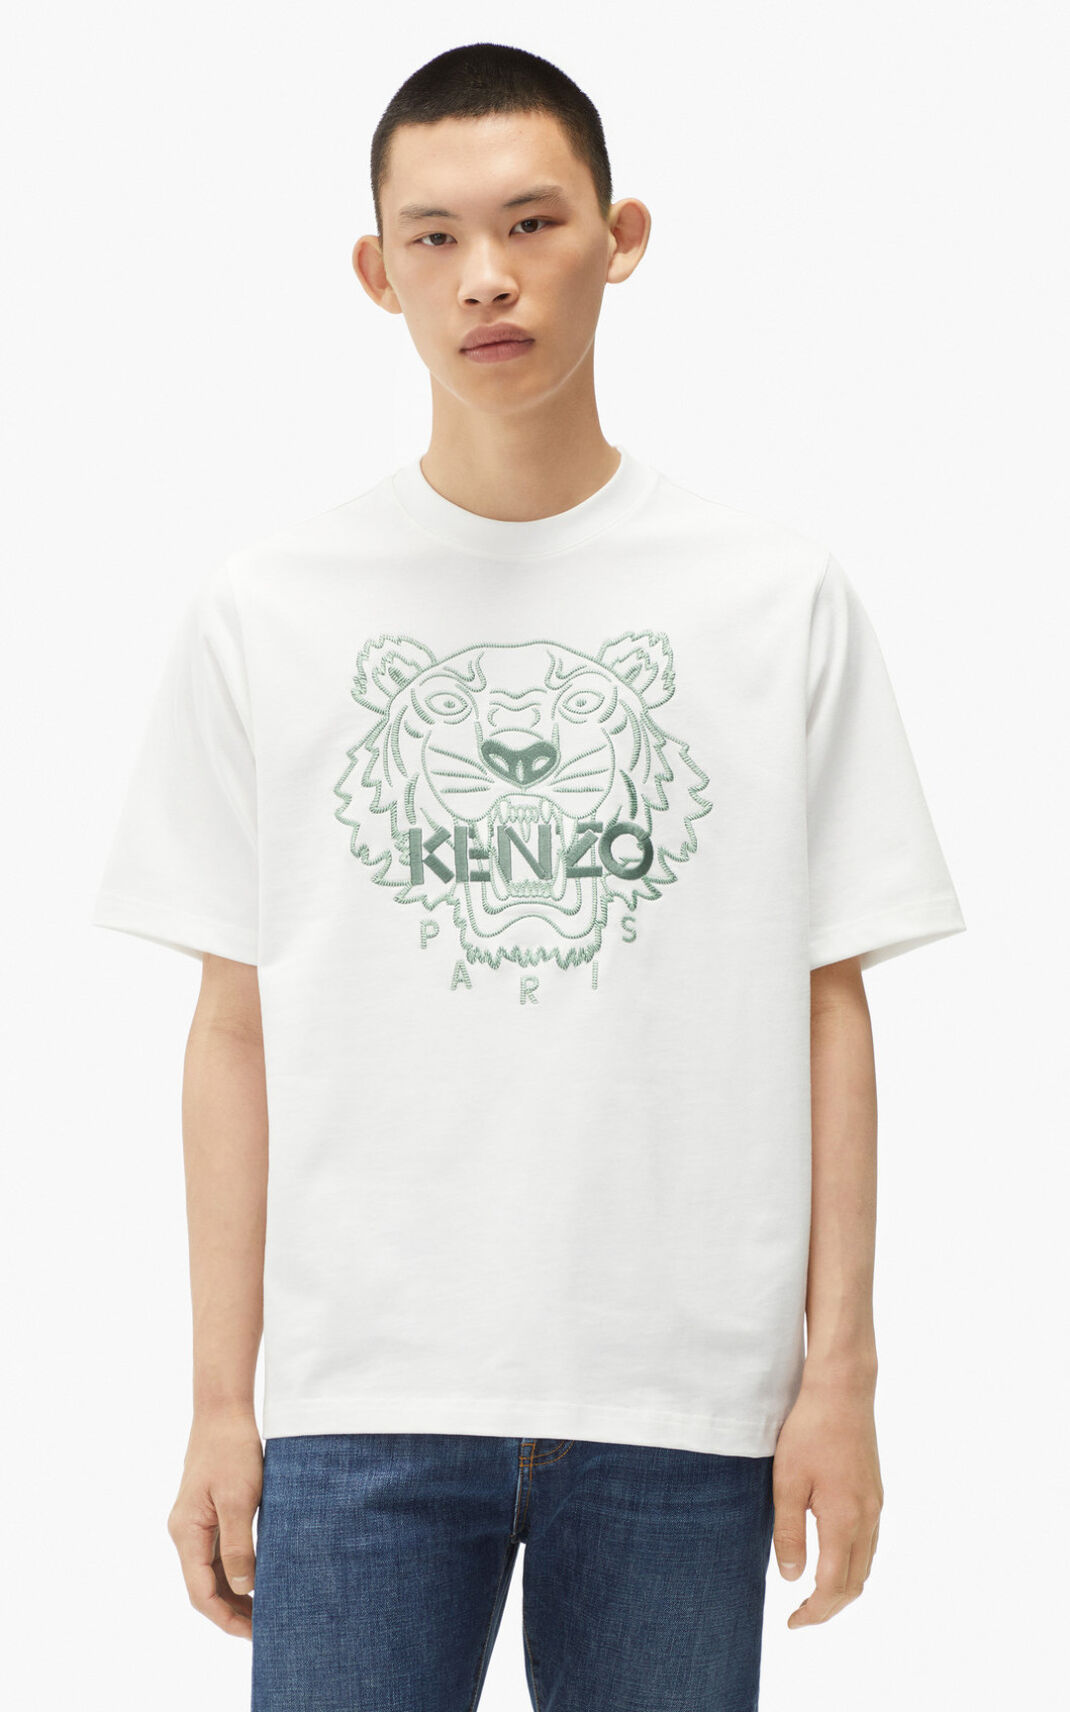 Kenzo Loose fitting Tiger T Shirt White For Mens 6945QOUYS